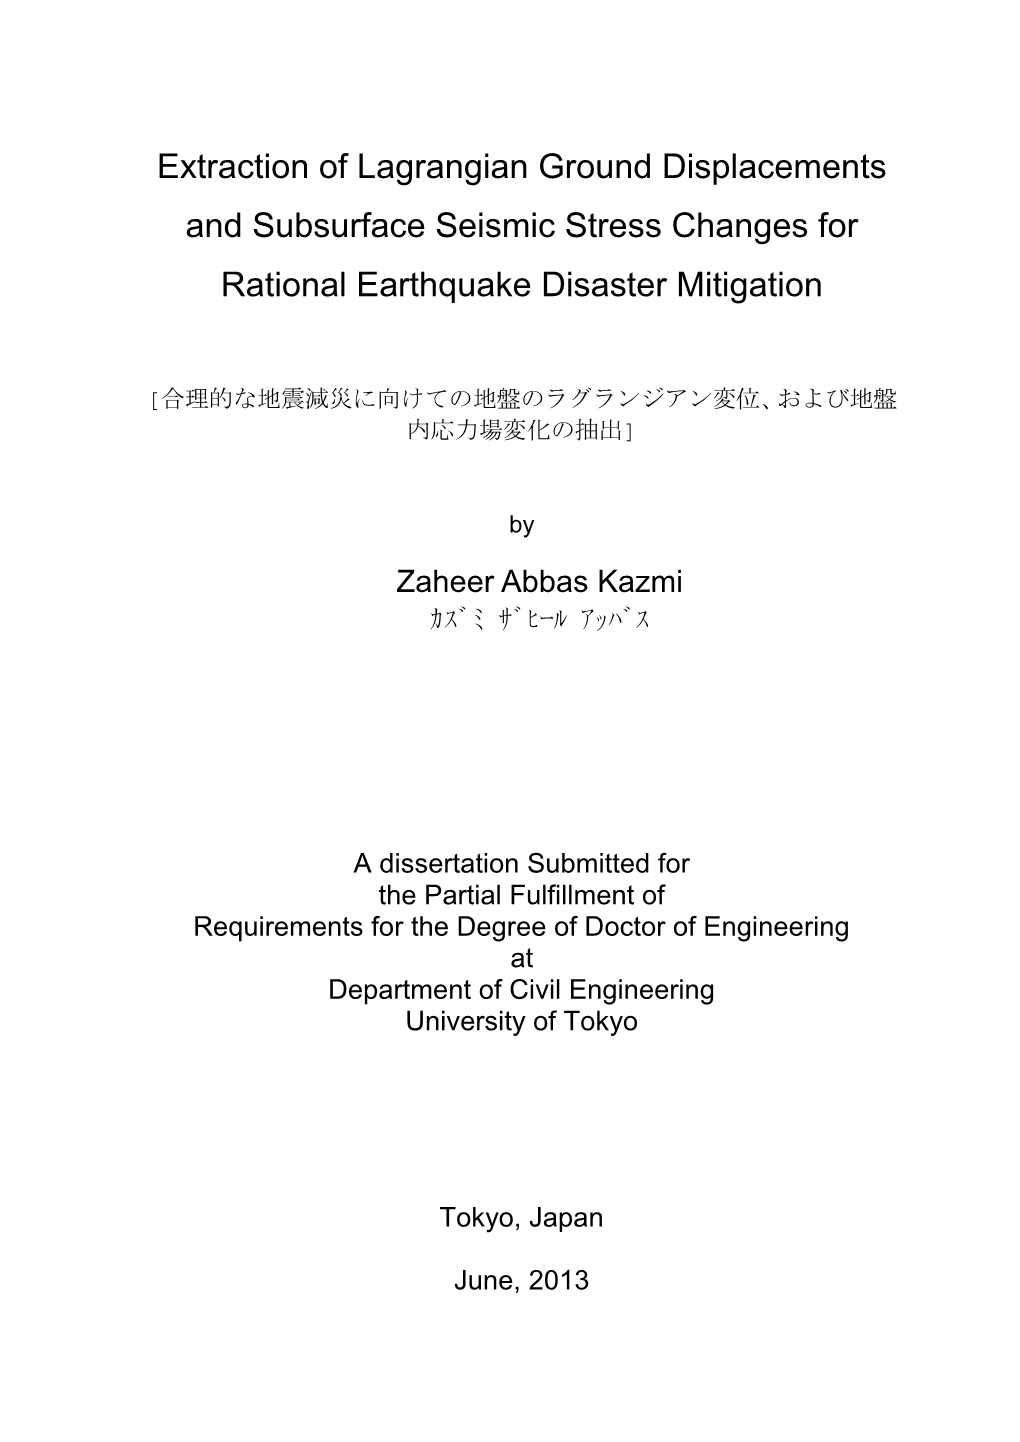 Extraction of Lagrangian Ground Displacements and Subsurface Seismic Stress Changes for Rational Earthquake Disaster Mitigation